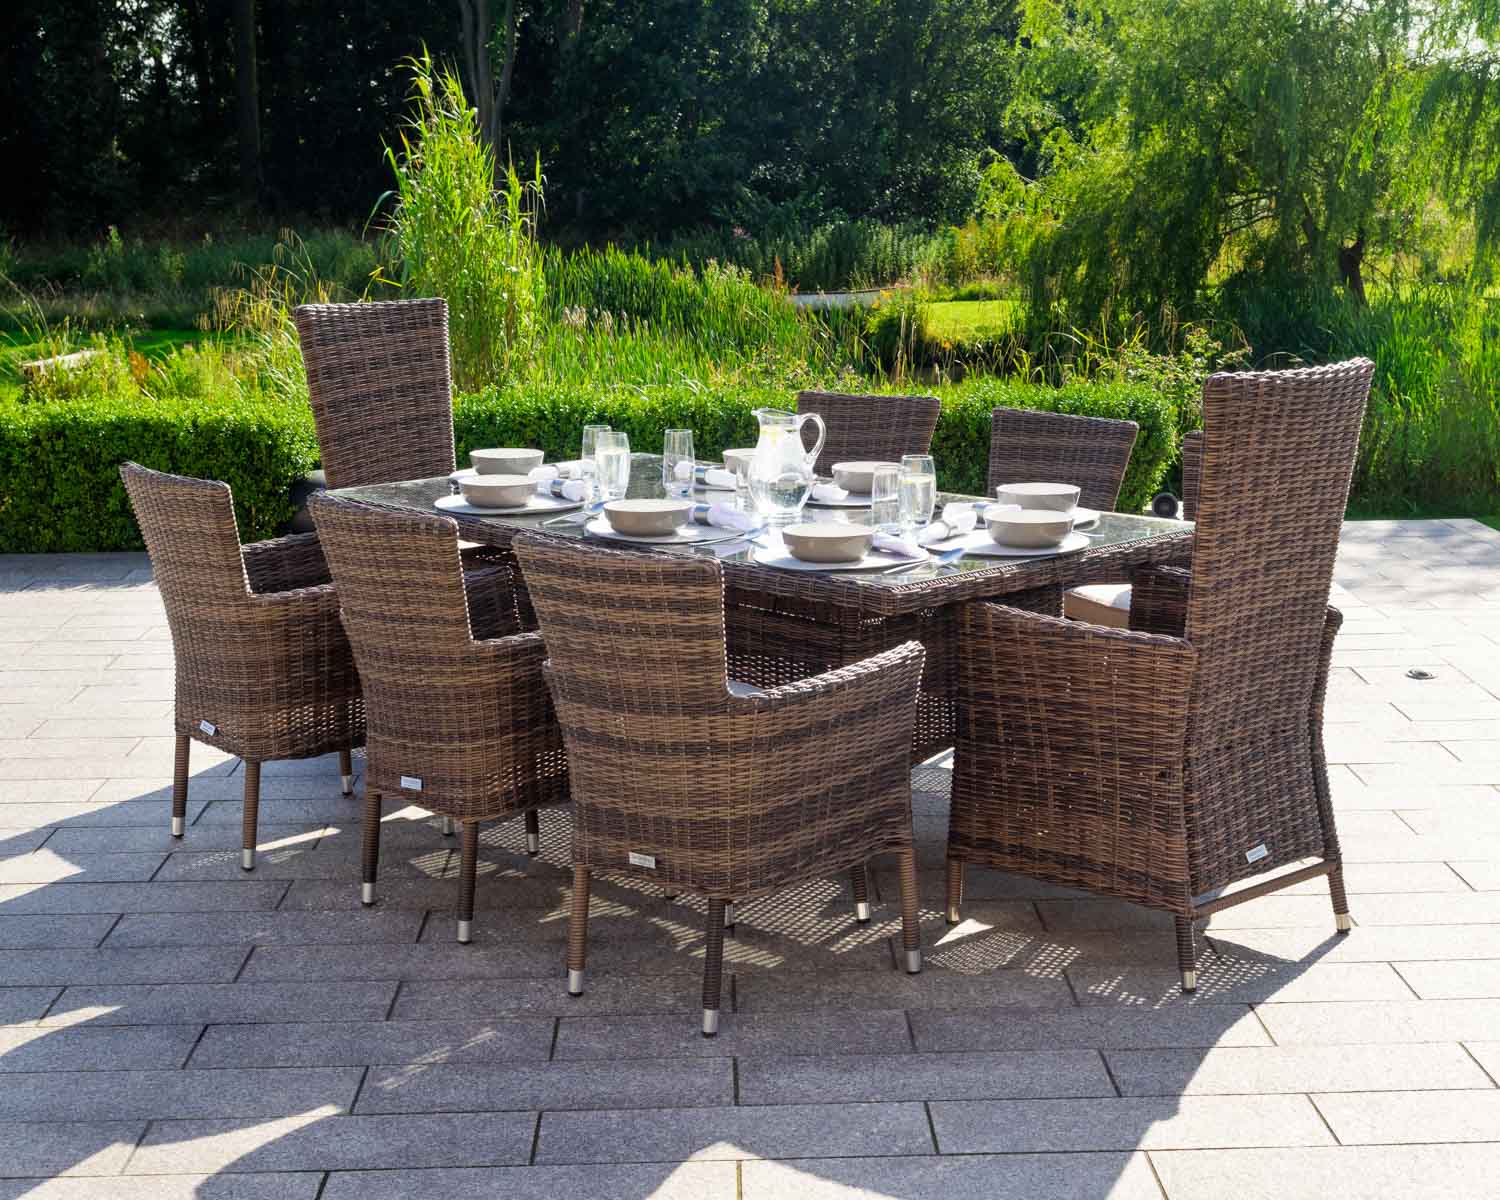 Rattan Garden Dining Table & 8 Chairs in Truffle Brown & Champagne